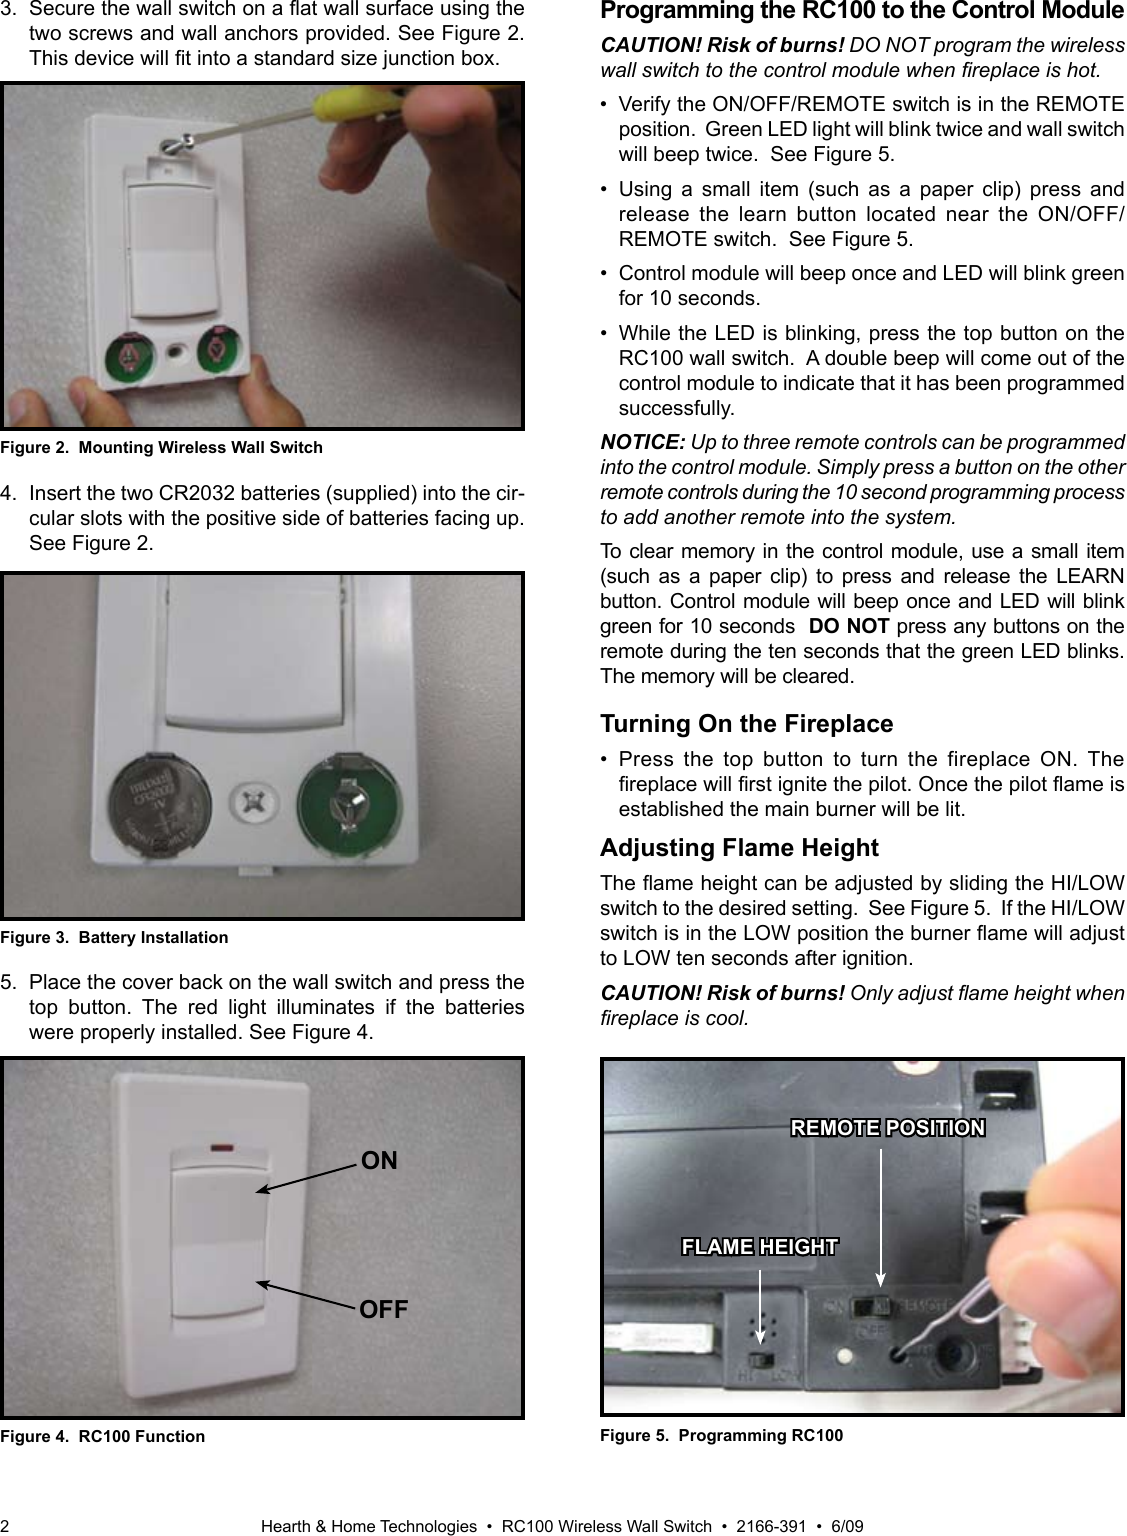 Hearth &amp; Home Technologies  •  RC100 Wireless Wall Switch  •  2166-391  •  6/092Figure 4.  RC100 Function5.  Place the cover back on the wall switch and press the top  button.  The  red  light  illuminates  if  the  batteries were properly installed. See Figure 4.ONOFFProgramming the RC100 to the Control ModuleCAUTION! Risk of burns! DO NOT program the wireless wall switch to the control module when replace is hot.•  Verify the ON/OFF/REMOTE switch is in the REMOTE position.  Green LED light will blink twice and wall switch will beep twice.  See Figure 5.•  Using a  small  item  (such  as  a  paper  clip)  press  and release  the  learn  button  located  near  the  ON/OFF/REMOTE switch.  See Figure 5.•  Control module will beep once and LED will blink green for 10 seconds. •  While the LED is blinking, press the top button on the RC100 wall switch.  A double beep will come out of the control module to indicate that it has been programmed successfully.NOTICE: Up to three remote controls can be programmed into the control module. Simply press a button on the other remote controls during the 10 second programming process to add another remote into the system.To clear memory in the control module, use a small item (such  as  a  paper  clip)  to  press  and  release  the  LEARN button. Control module will beep once and LED will blink green for 10 seconds  DO NOT press any buttons on the remote during the ten seconds that the green LED blinks. The memory will be cleared.Turning On the Fireplace•  Press  the  top  button  to  turn  the  fireplace  ON.  The replacewillrstignitethepilot.Oncethepilotameisestablished the main burner will be lit.  Adjusting Flame HeightTheameheightcanbeadjustedbyslidingtheHI/LOWswitch to the desired setting.  See Figure 5.  If the HI/LOW switchisintheLOWpositiontheburneramewilladjustto LOW ten seconds after ignition.CAUTION! Risk of burns! Only adjust ame height when replace is cool.Figure 5.  Programming RC100REMOTE POSITIONFigure 3.  Battery Installation4.  Insert the two CR2032 batteries (supplied) into the cir-cular slots with the positive side of batteries facing up.  See Figure 2.FLAME HEIGHTFigure 2.  Mounting Wireless Wall Switch3.Securethewallswitchonaatwallsurfaceusingthetwo screws and wall anchors provided. See Figure 2. Thisdevicewilltintoastandardsizejunctionbox.